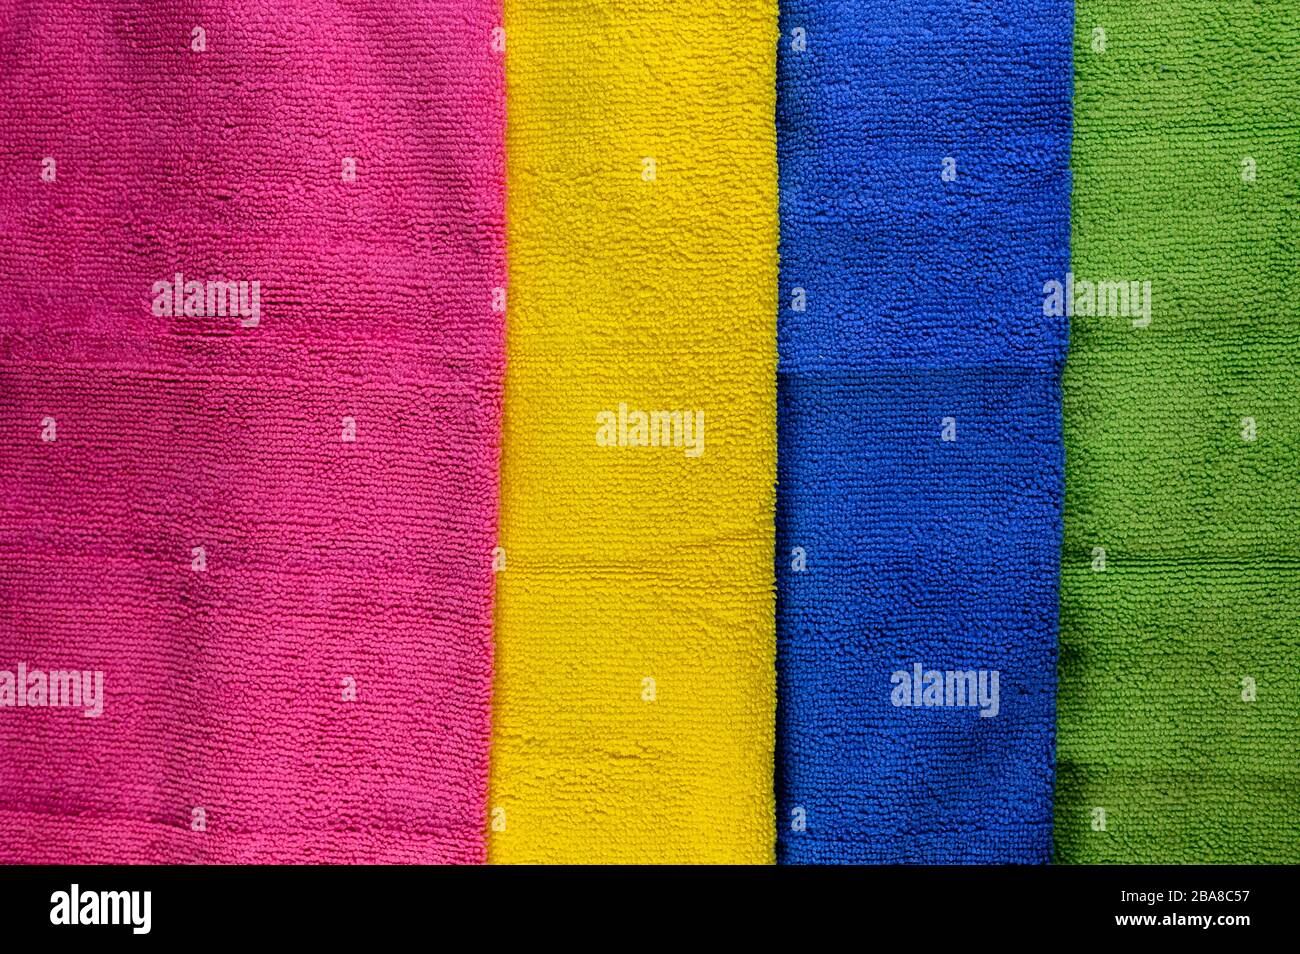 colorful microfiber Towels for beach use and domestic cleaning Stock Photo